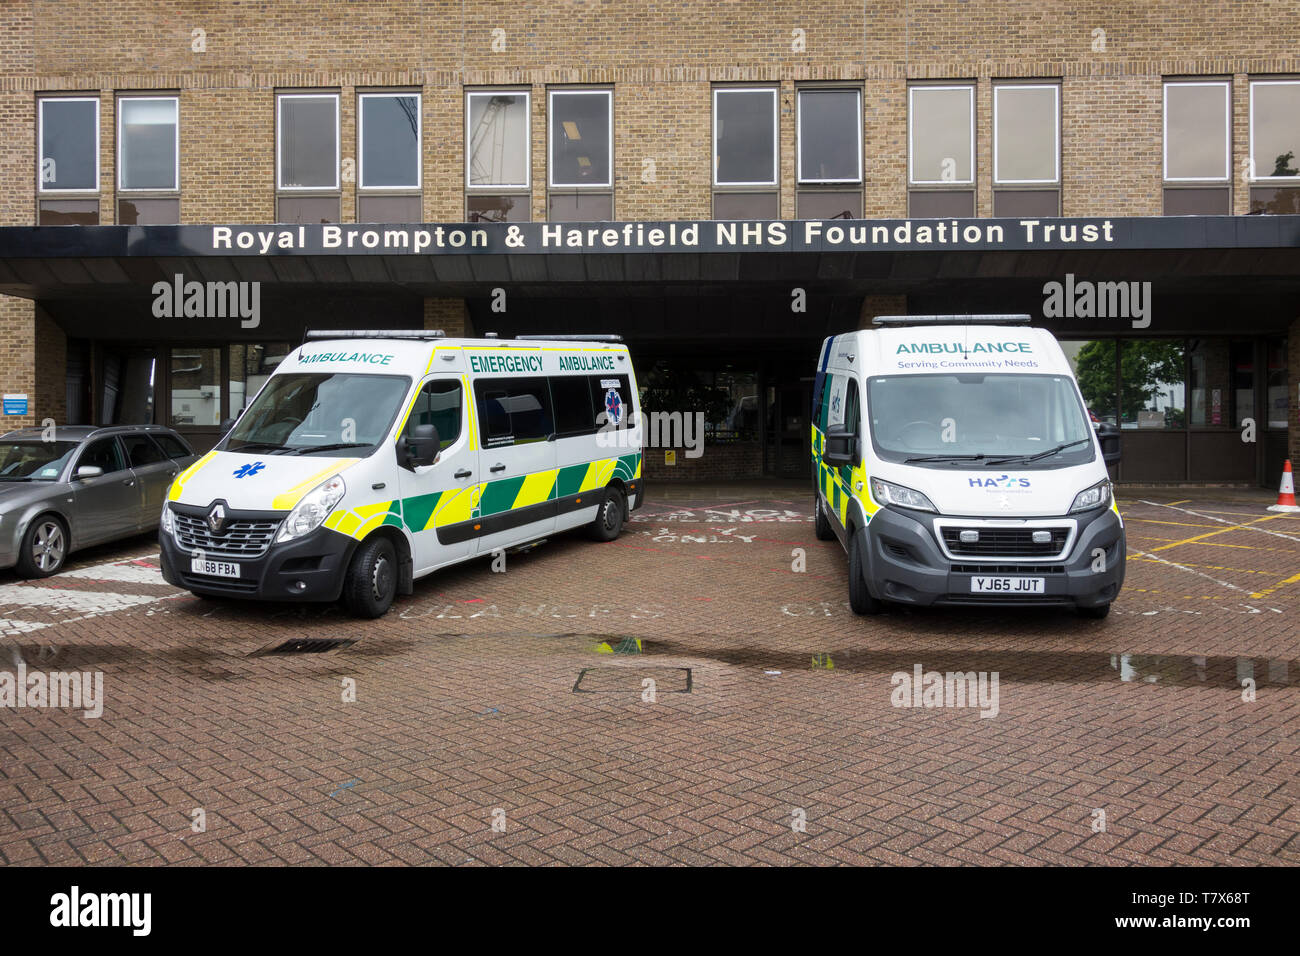 Ambulances parked outside the Royal Brompton & Harefield Foundation Trust hospital entrance in Chelsea, London, UK Stock Photo